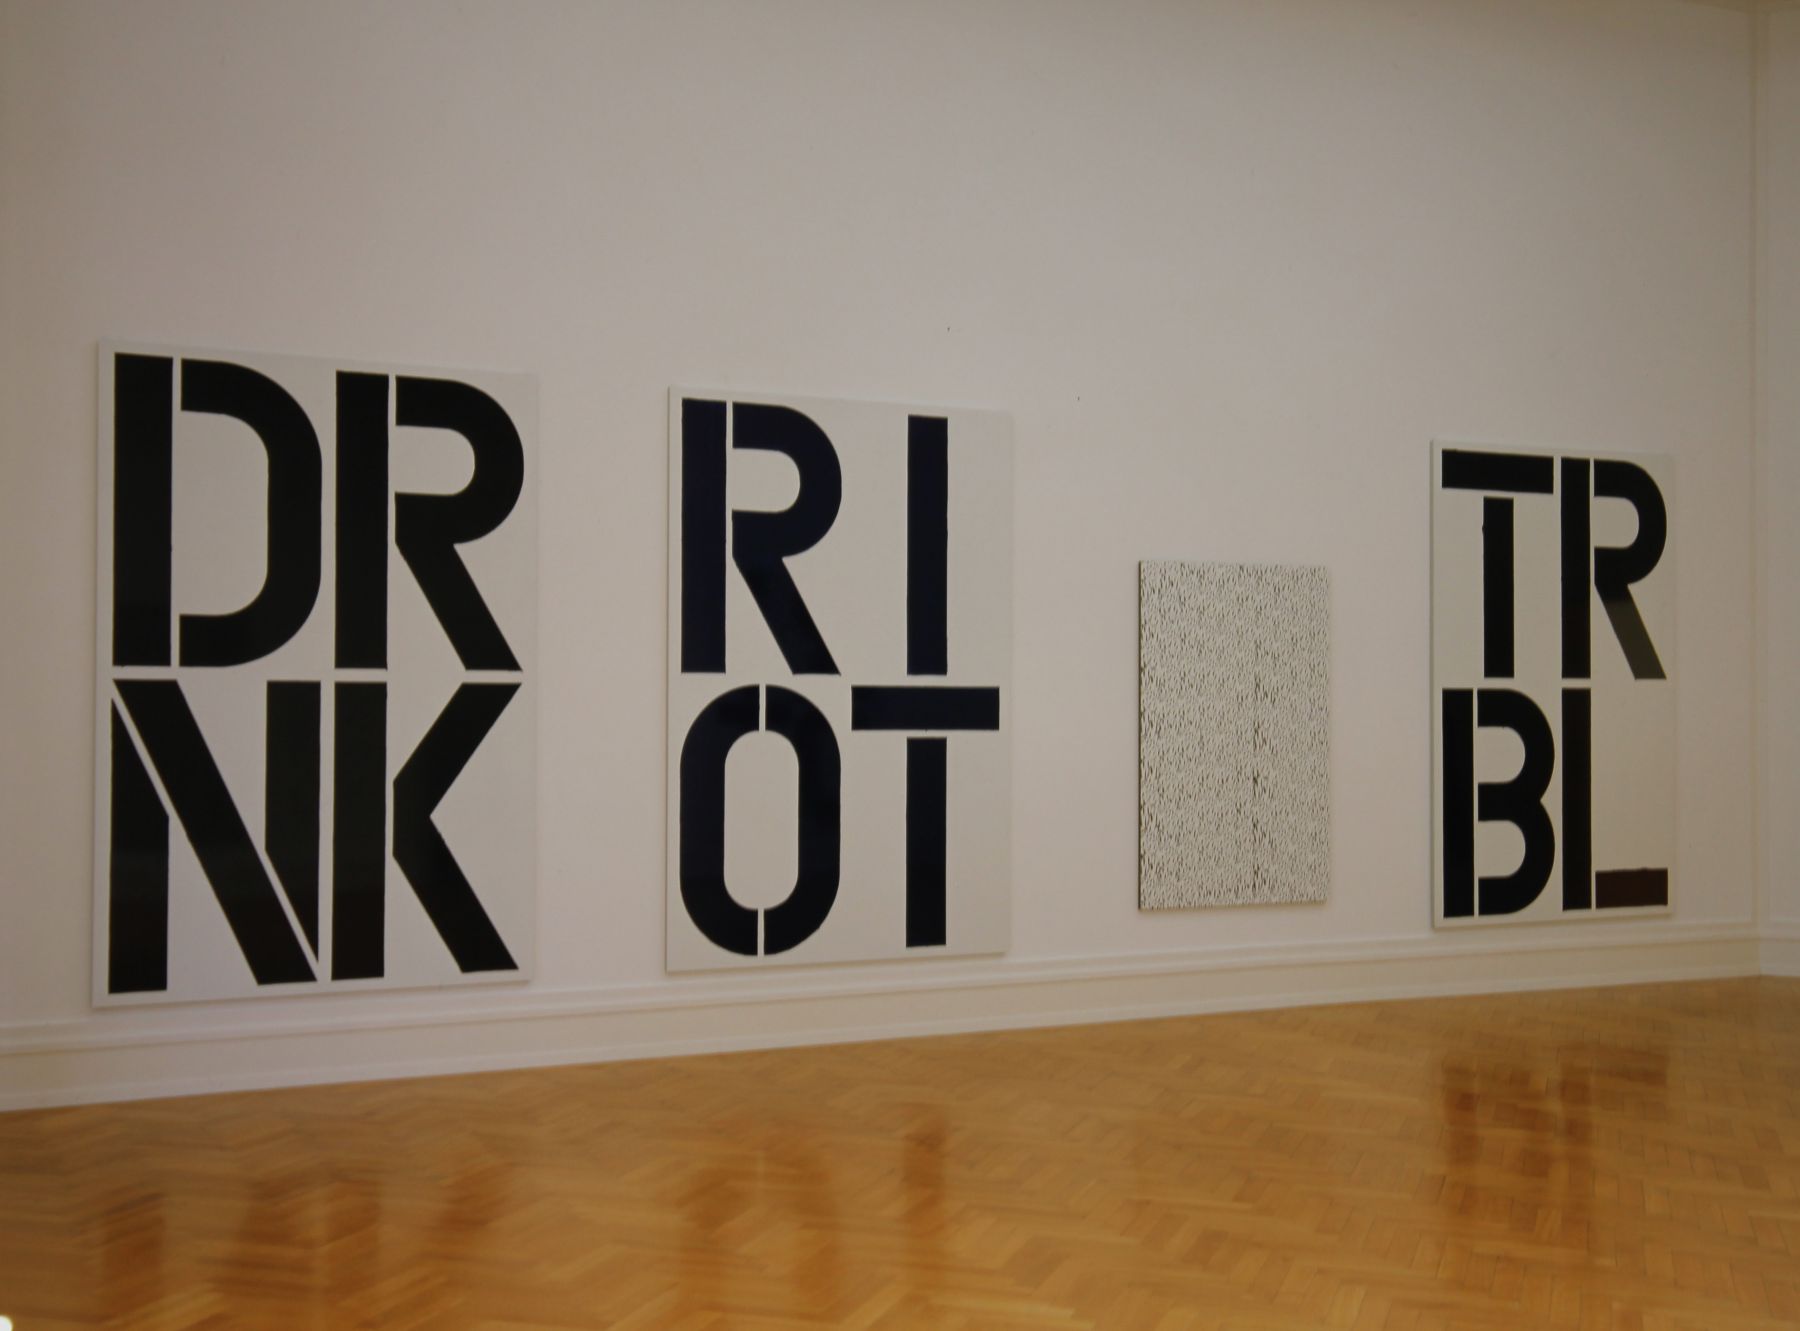 Christopher Wool, installation view, Kunsthalle Bern, 1991
Courtesy the artist and Kunsthalle Bern